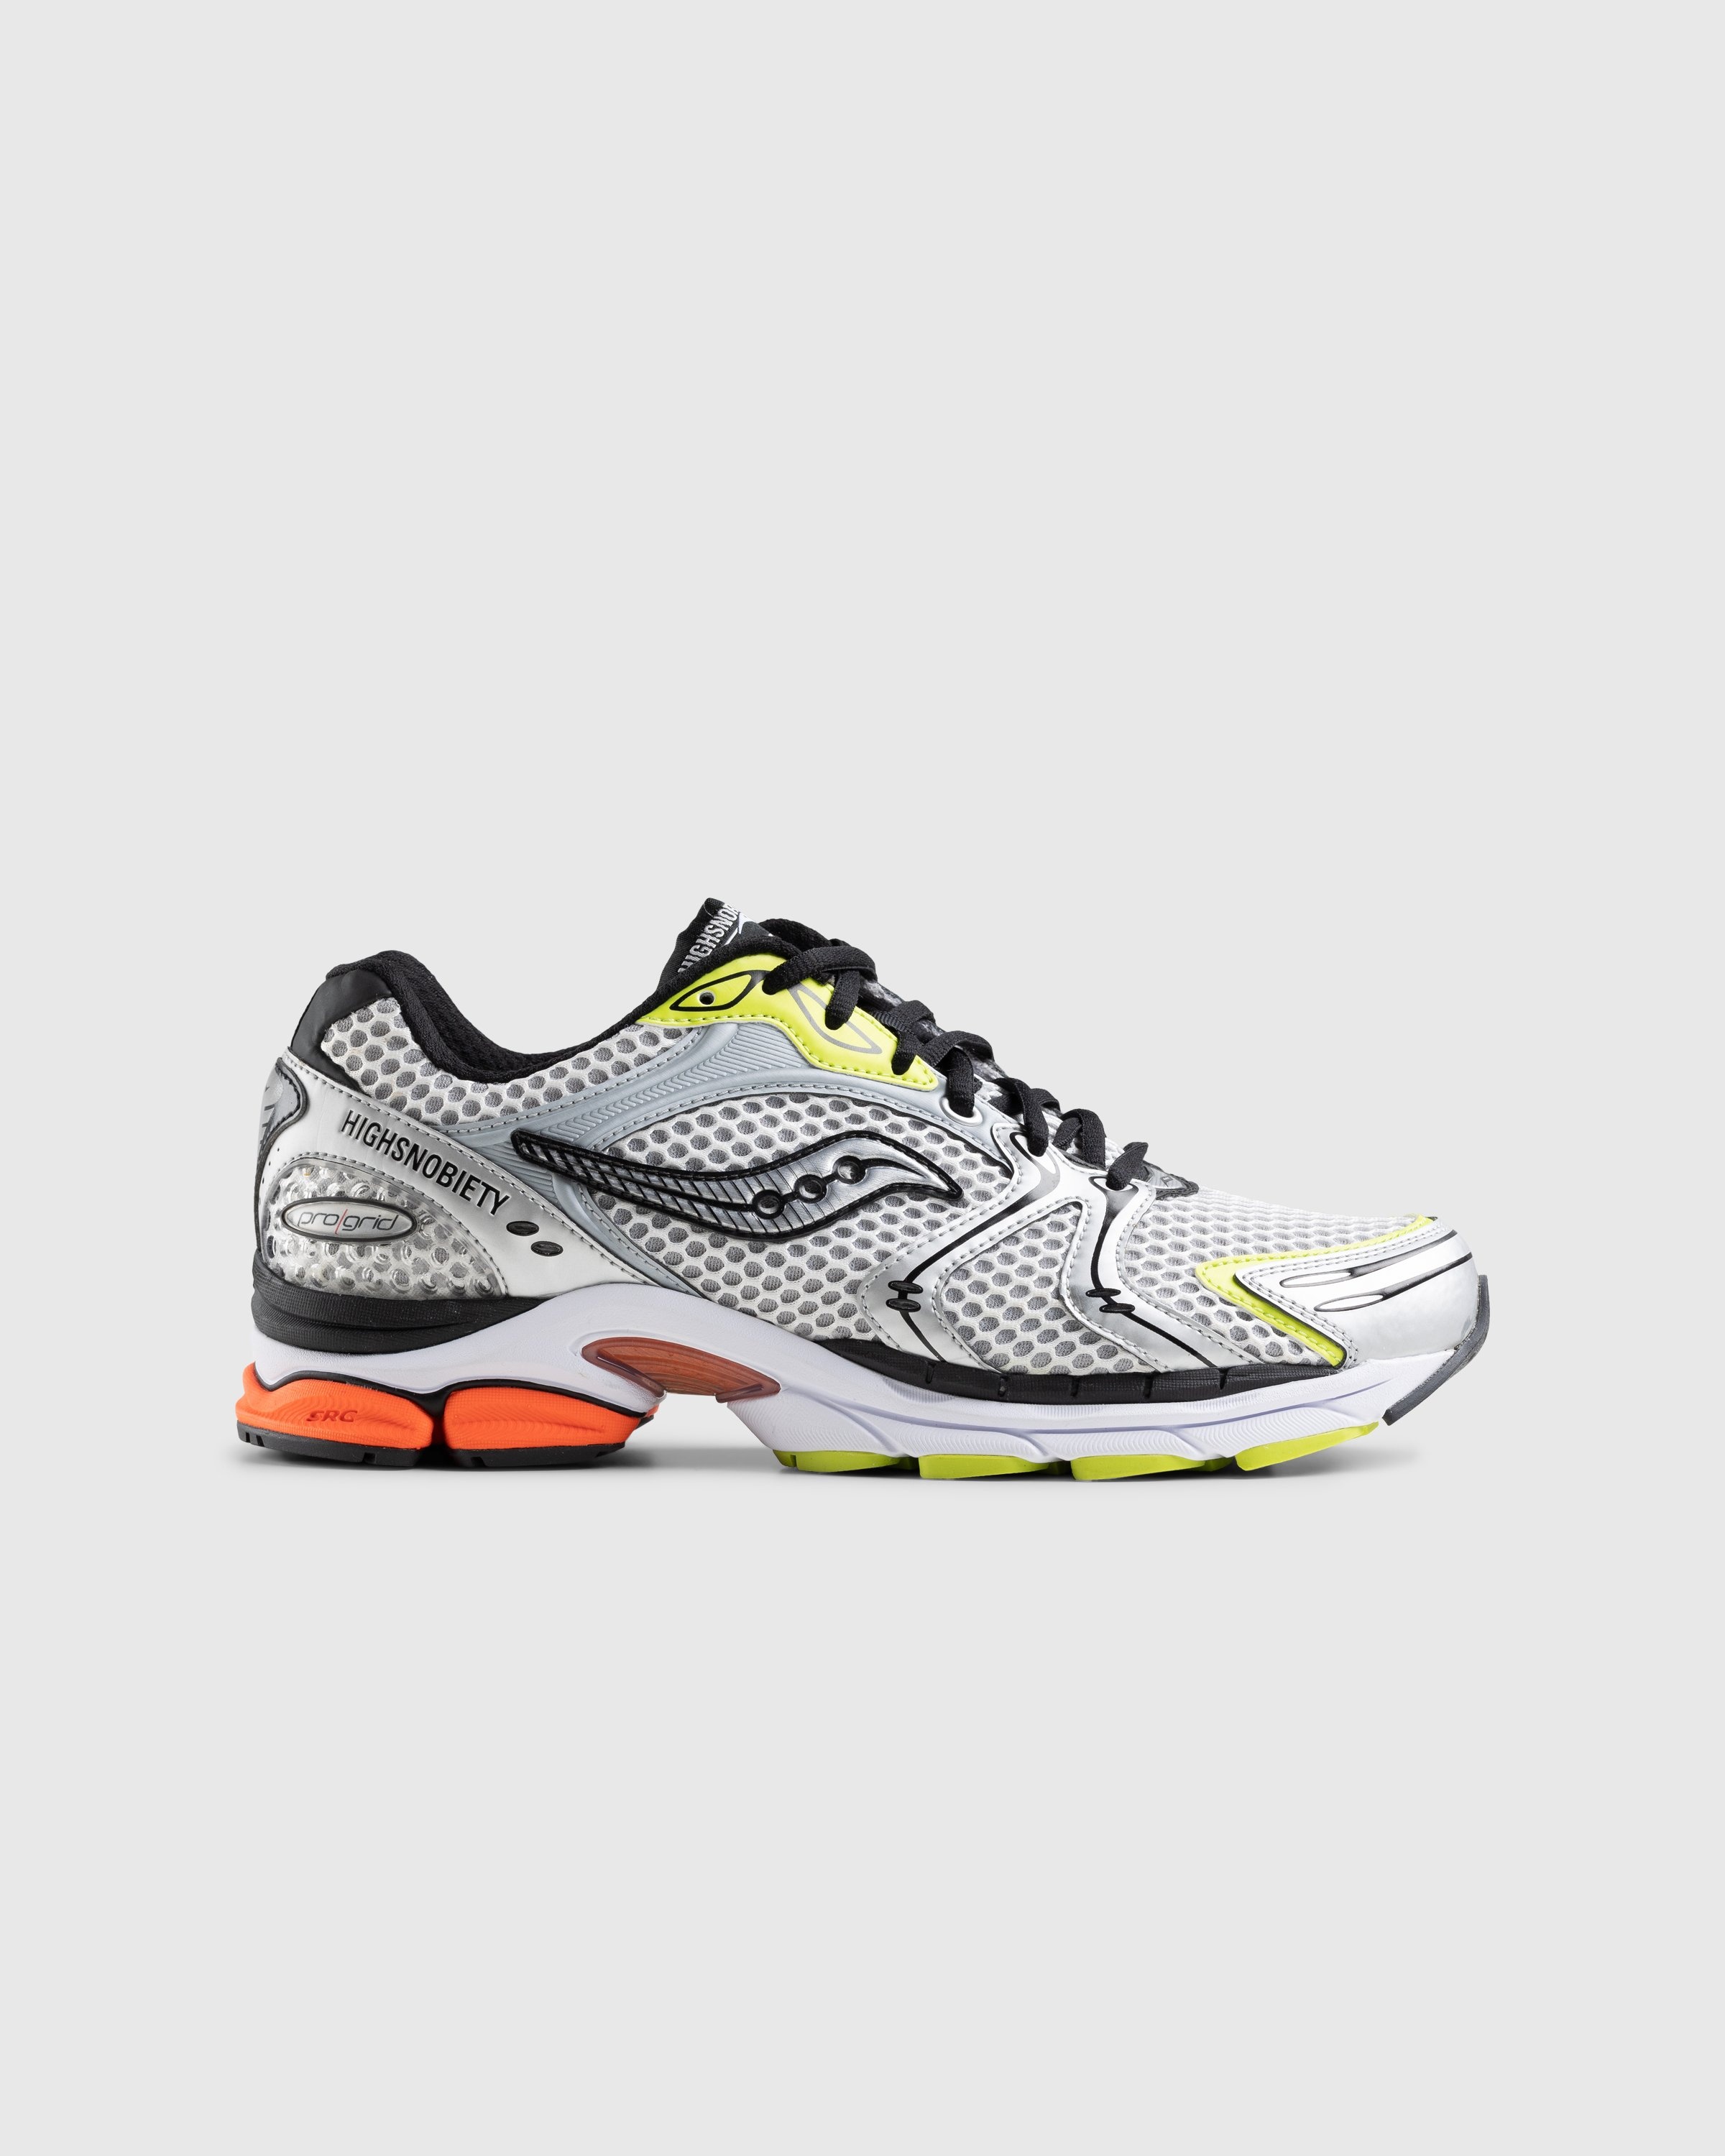 Saucony x Highsnobiety – Pro Grid Triumph 4 Silver/Multi - Sneakers - Silver - Image 1